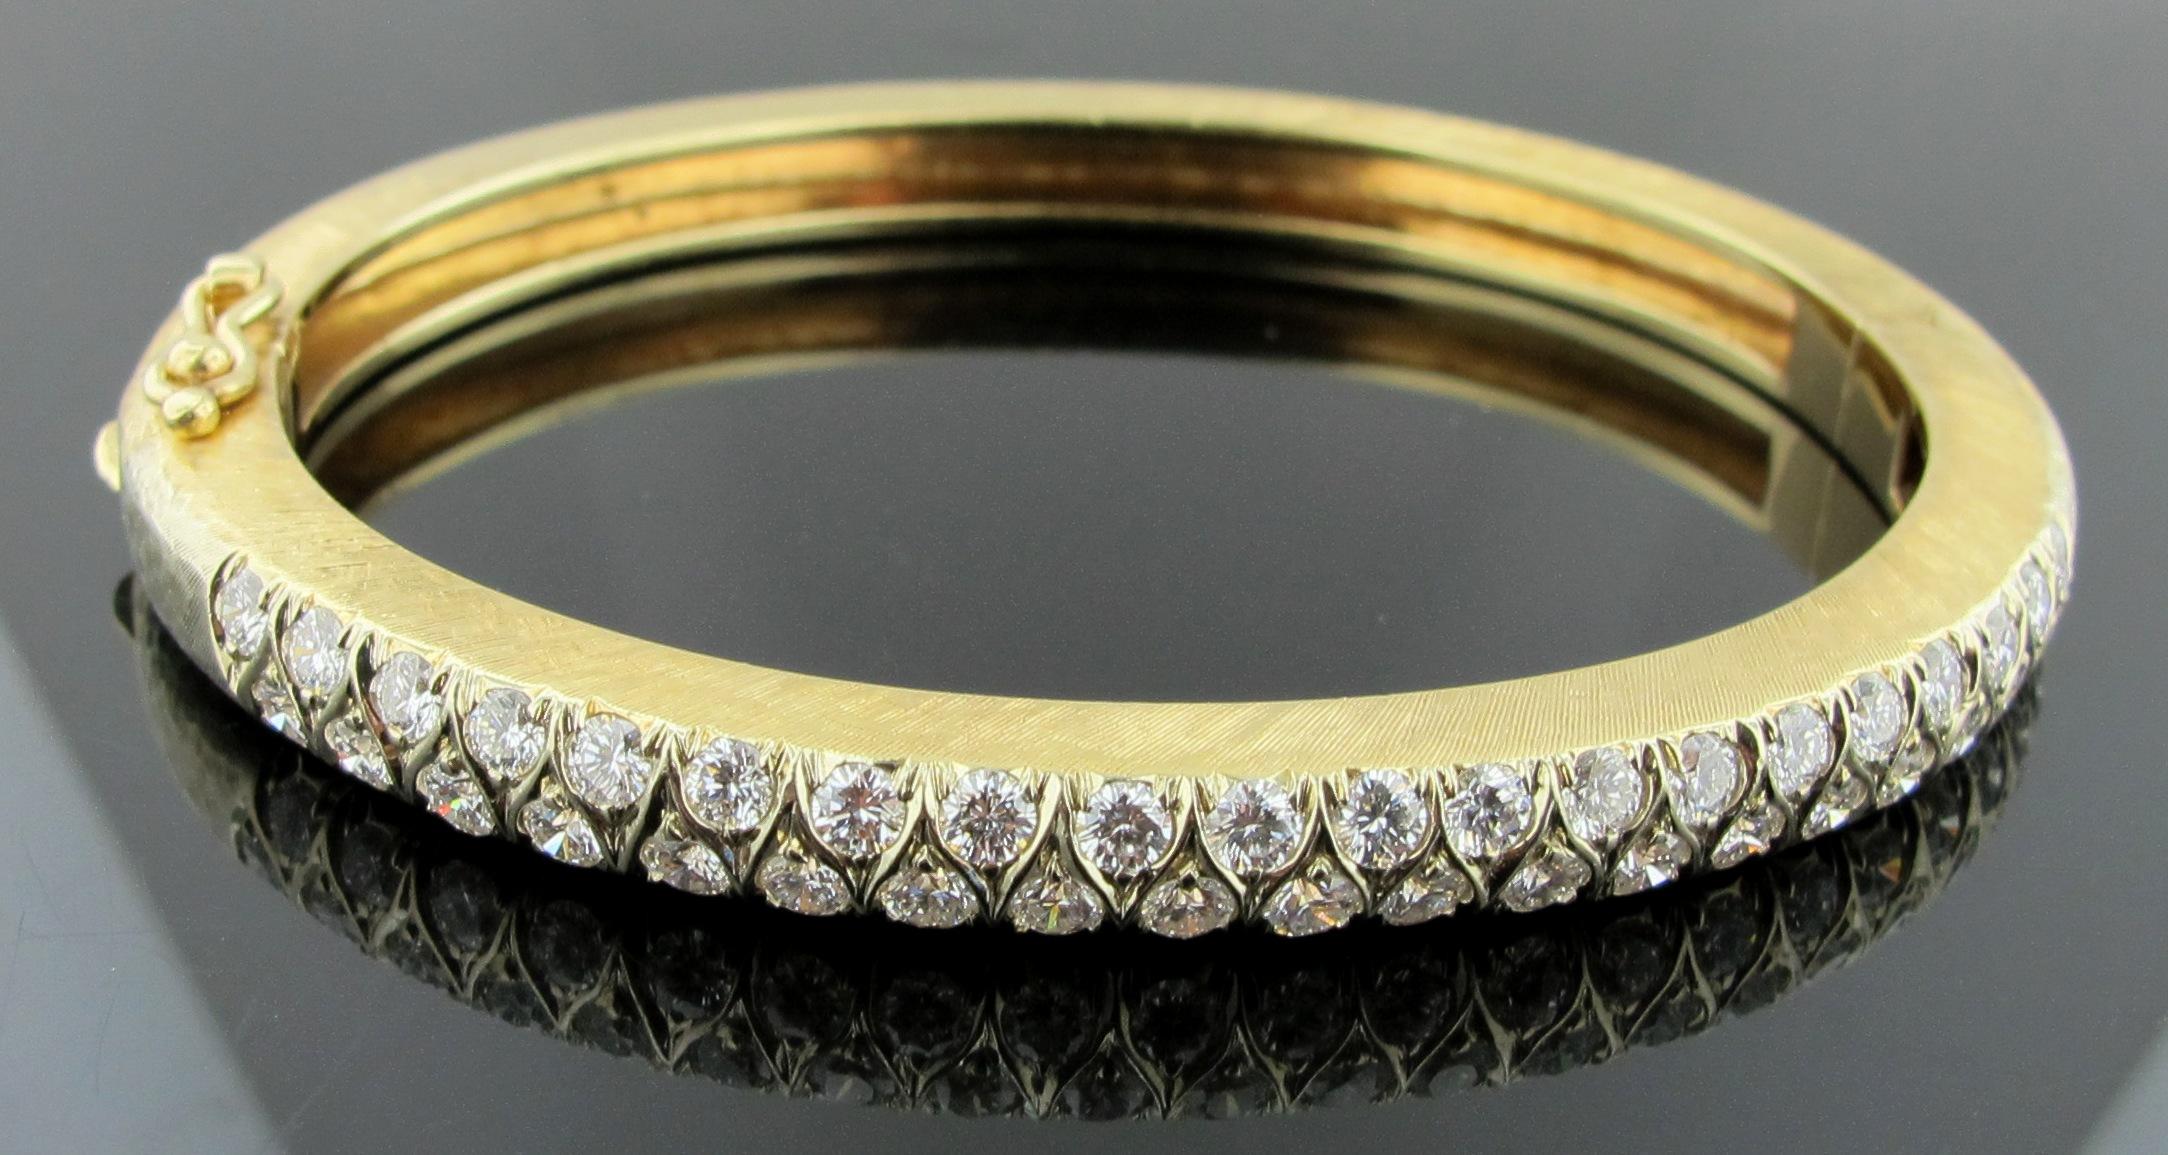 14 karat yellow gold bangle, with a gold weight of 33 grams, set with 40 round brilliant diamonds, weighing 2.00 carats. F-G in Color, VS in Clarity